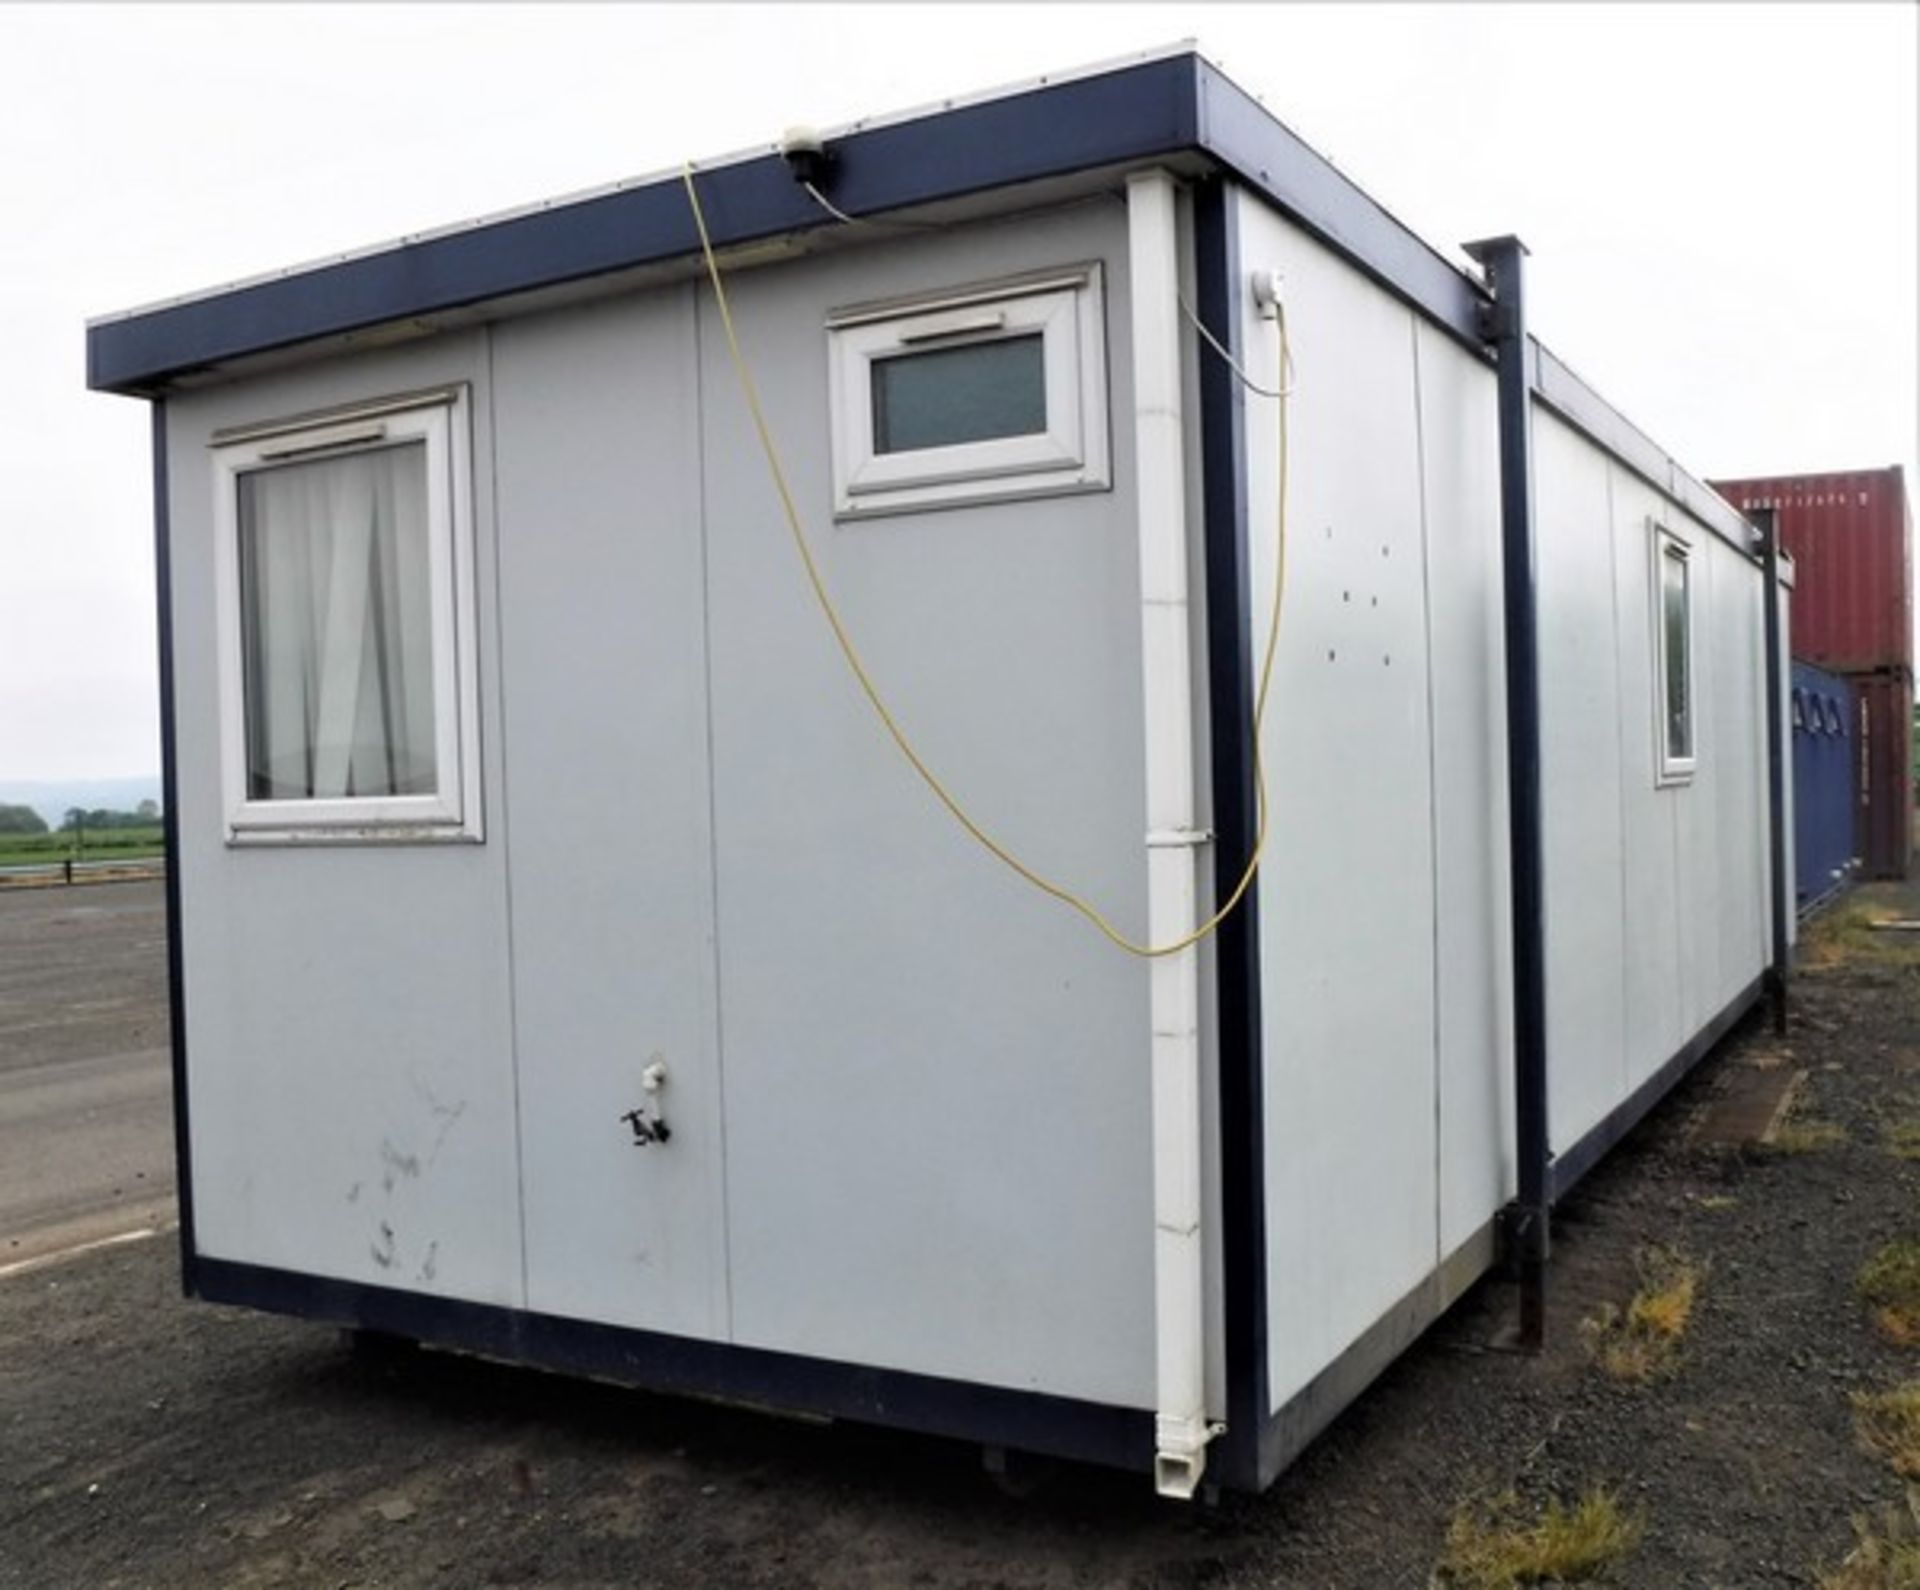 2007 PORTABLE BUILDING. 10m x 3.1m with toilet & kitchen. Double glazed, alarm fitted, insulated. - Image 7 of 12